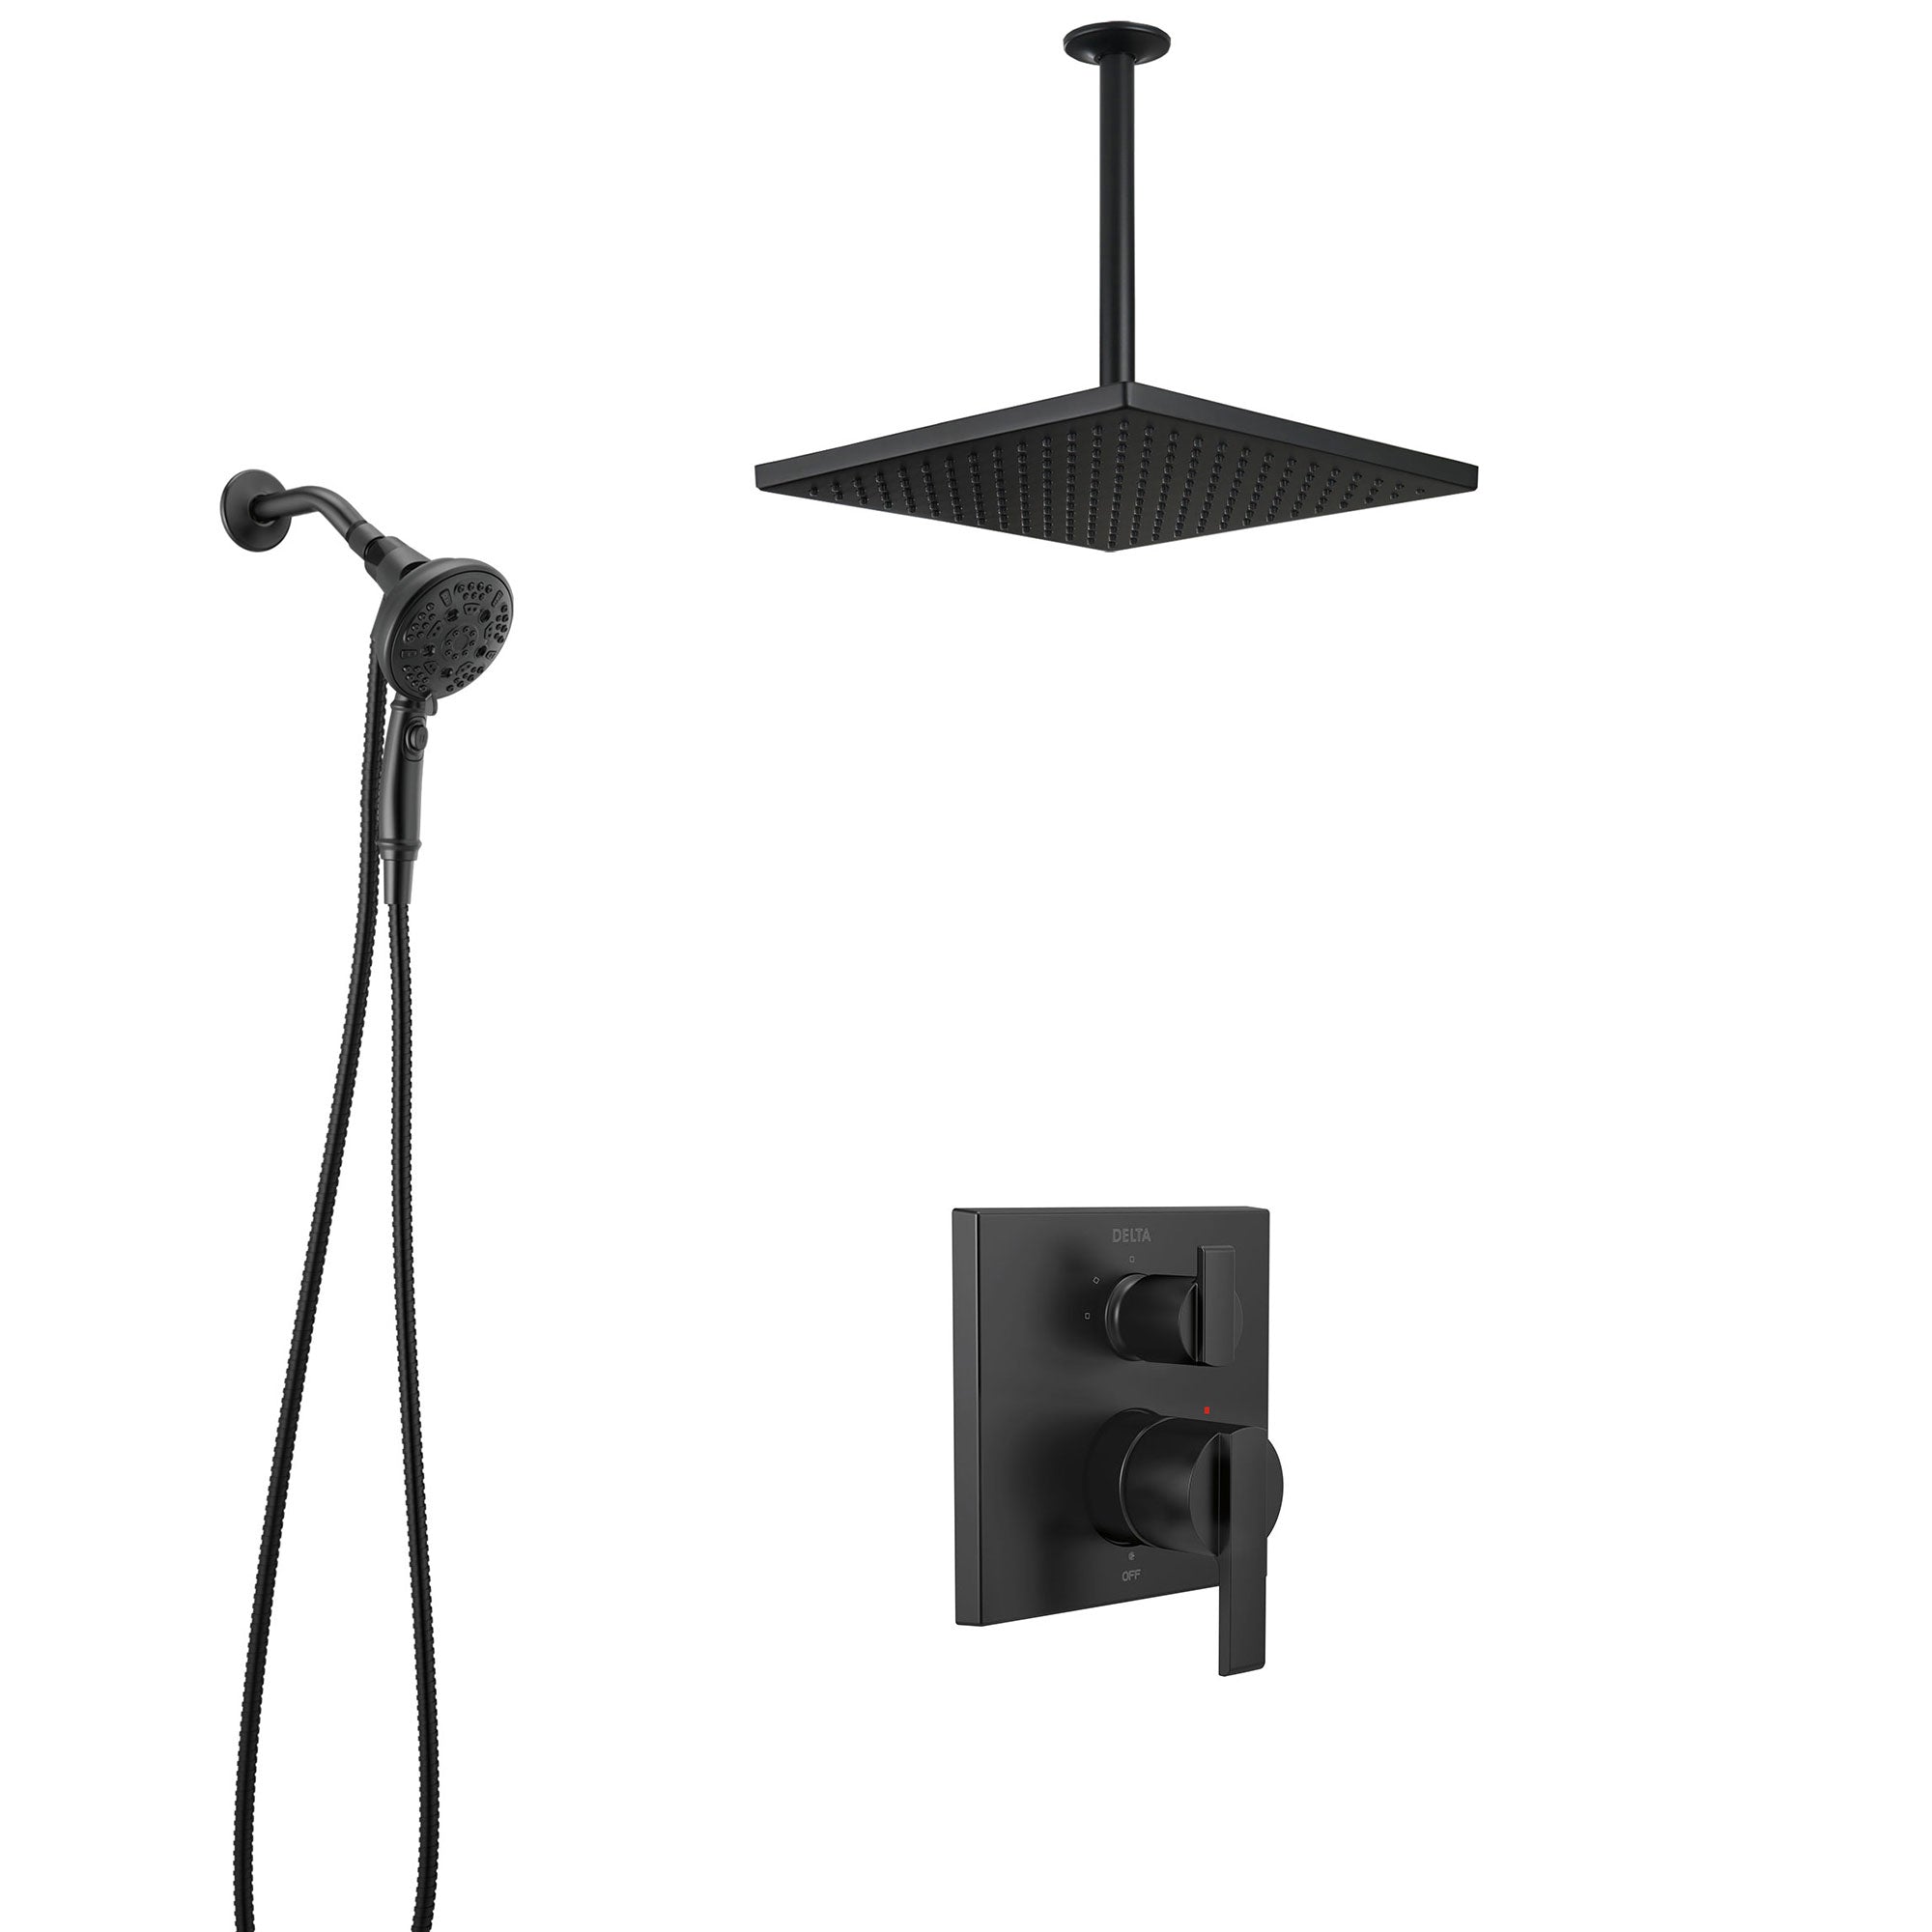 Delta Ara Matte Black Finish Shower System with Integrated Diverter, Detachable SureDock Hand Shower, and Large Ceiling Mounted Rain Head SS24867BL8